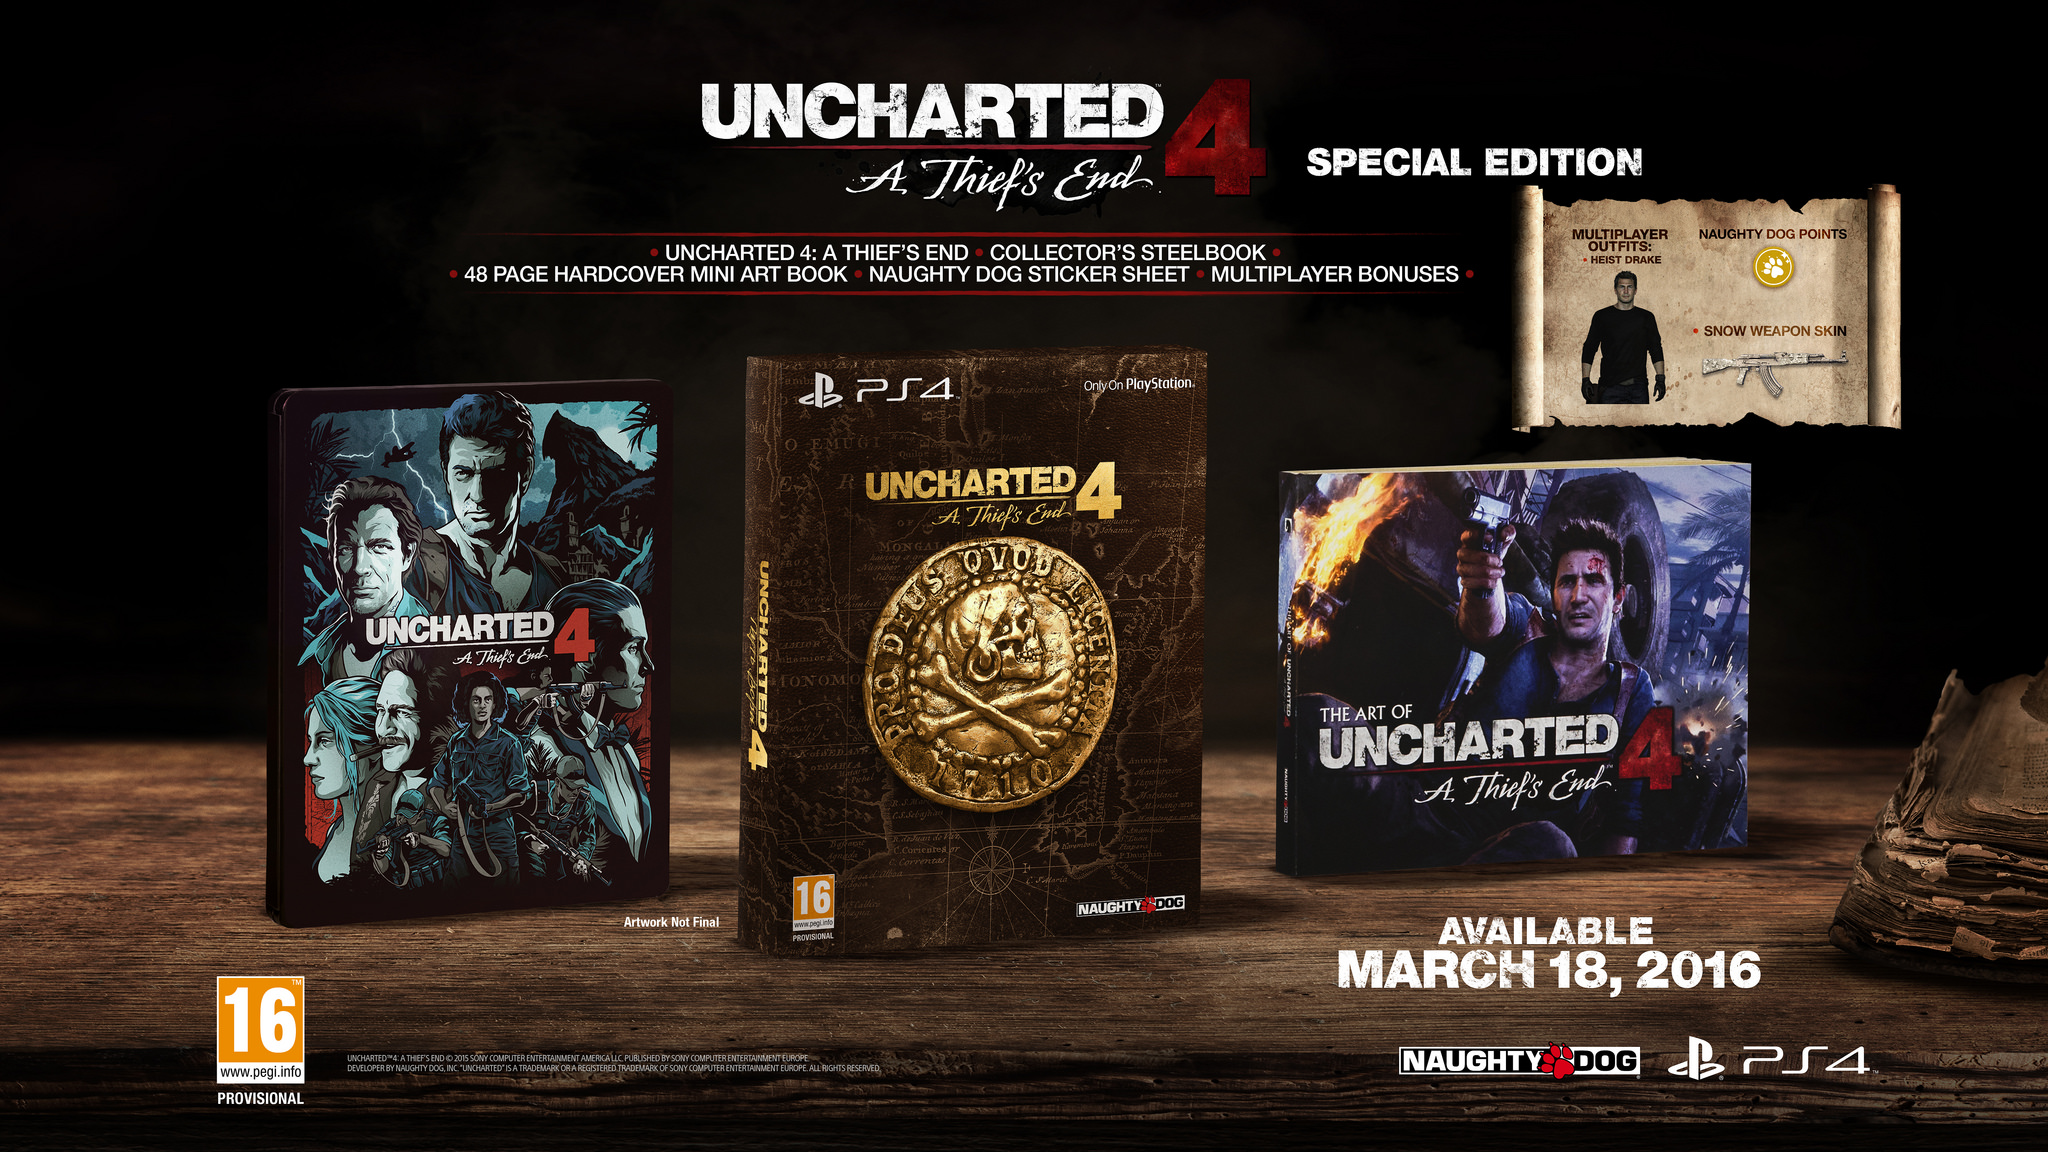 Uncharted 4 special edition